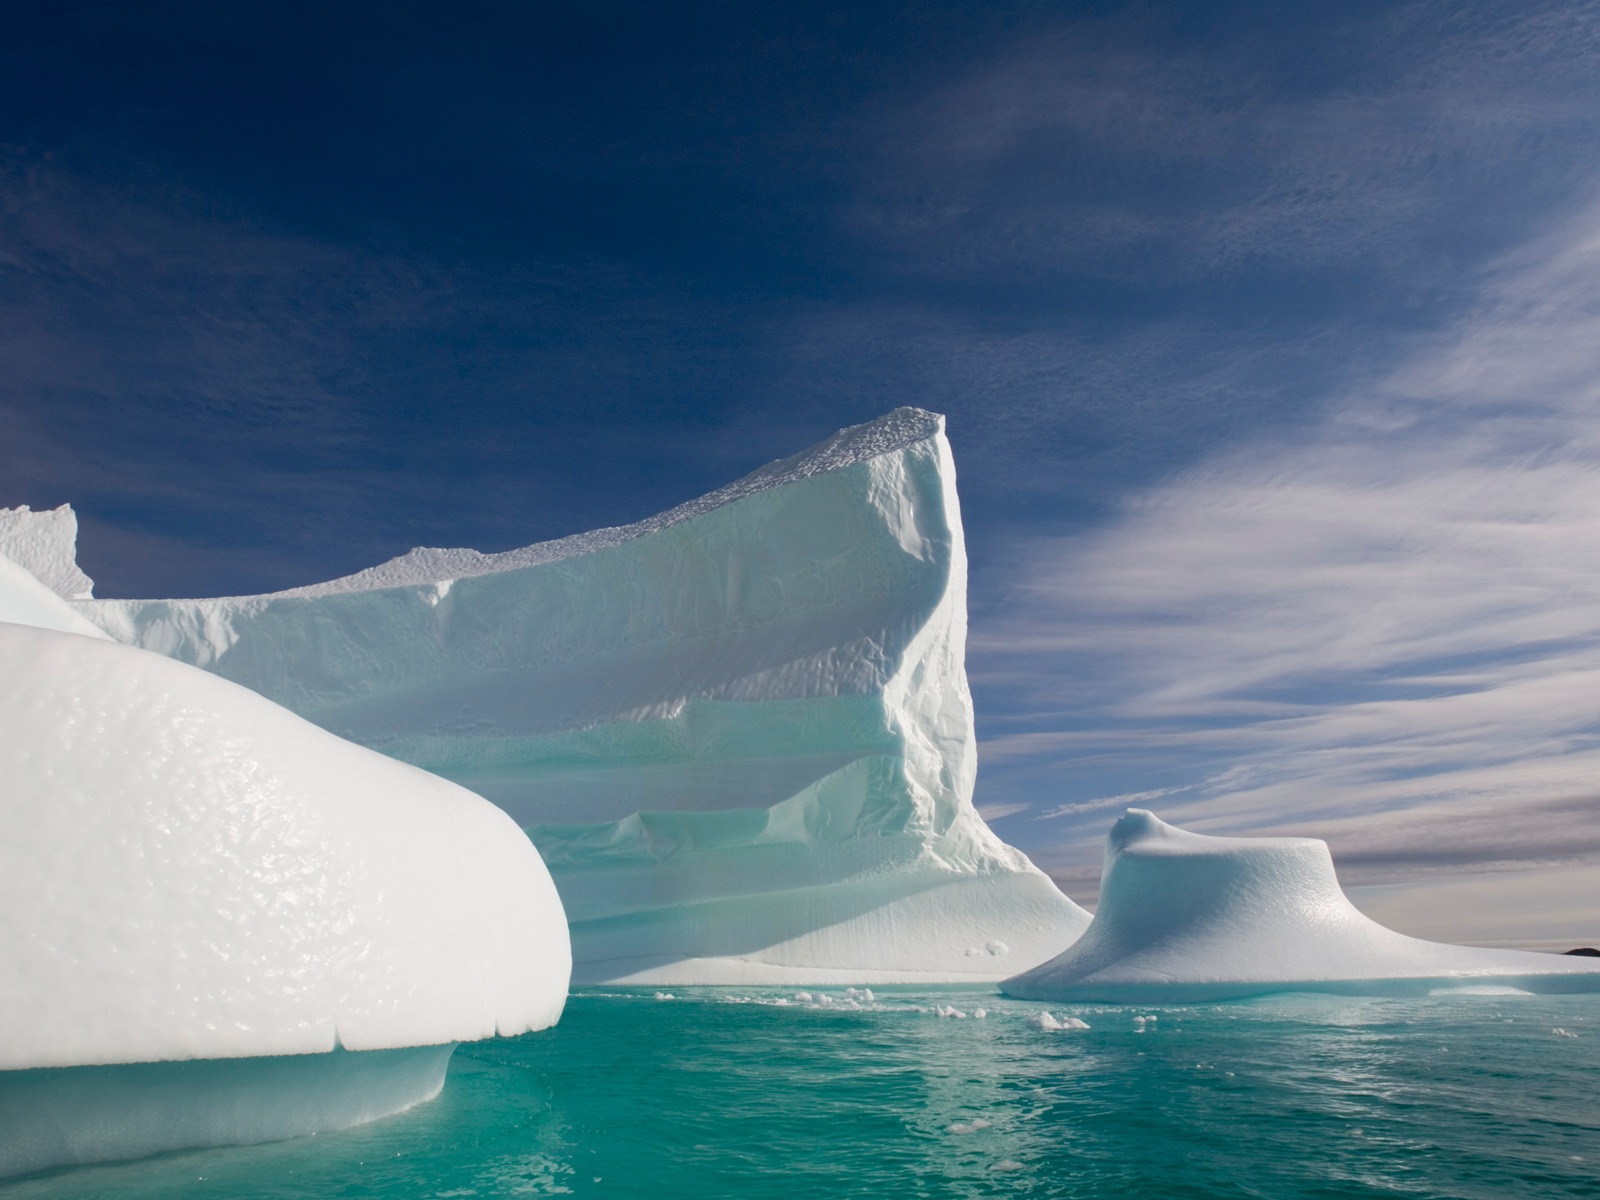 Windows 8 Wallpapers: Arctic, the nature ecological landscape, arctic animals #14 - 1600x1200